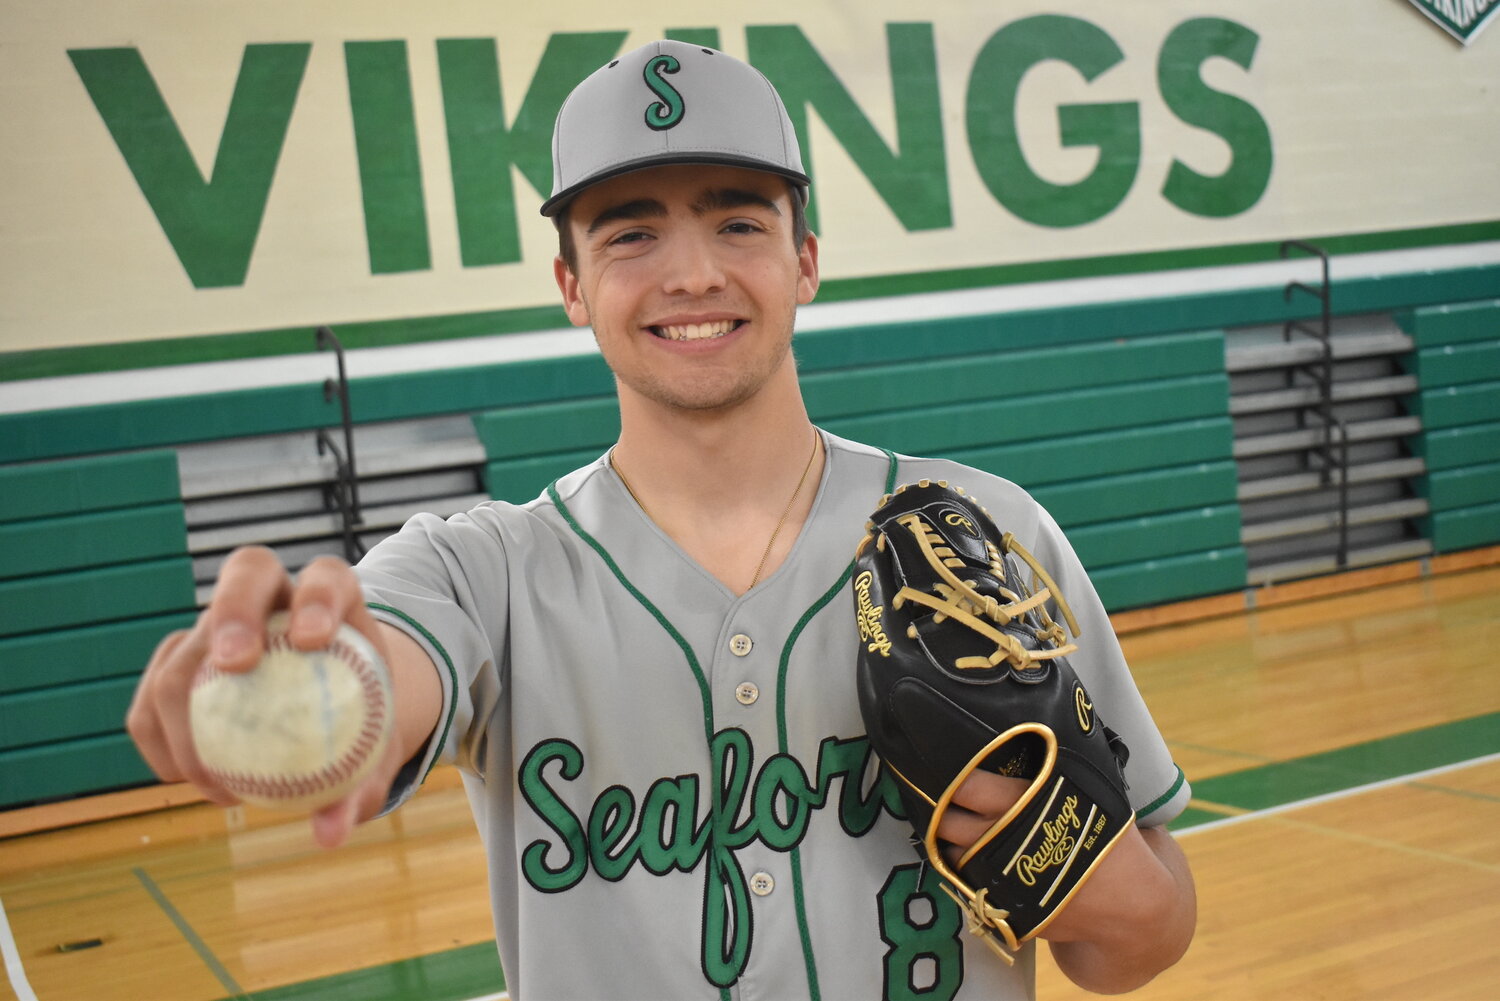 Billy Kind, a senior at Seaford High School, hurled a perfect game in an 11-0 shutout of Locust Valley on April 25.